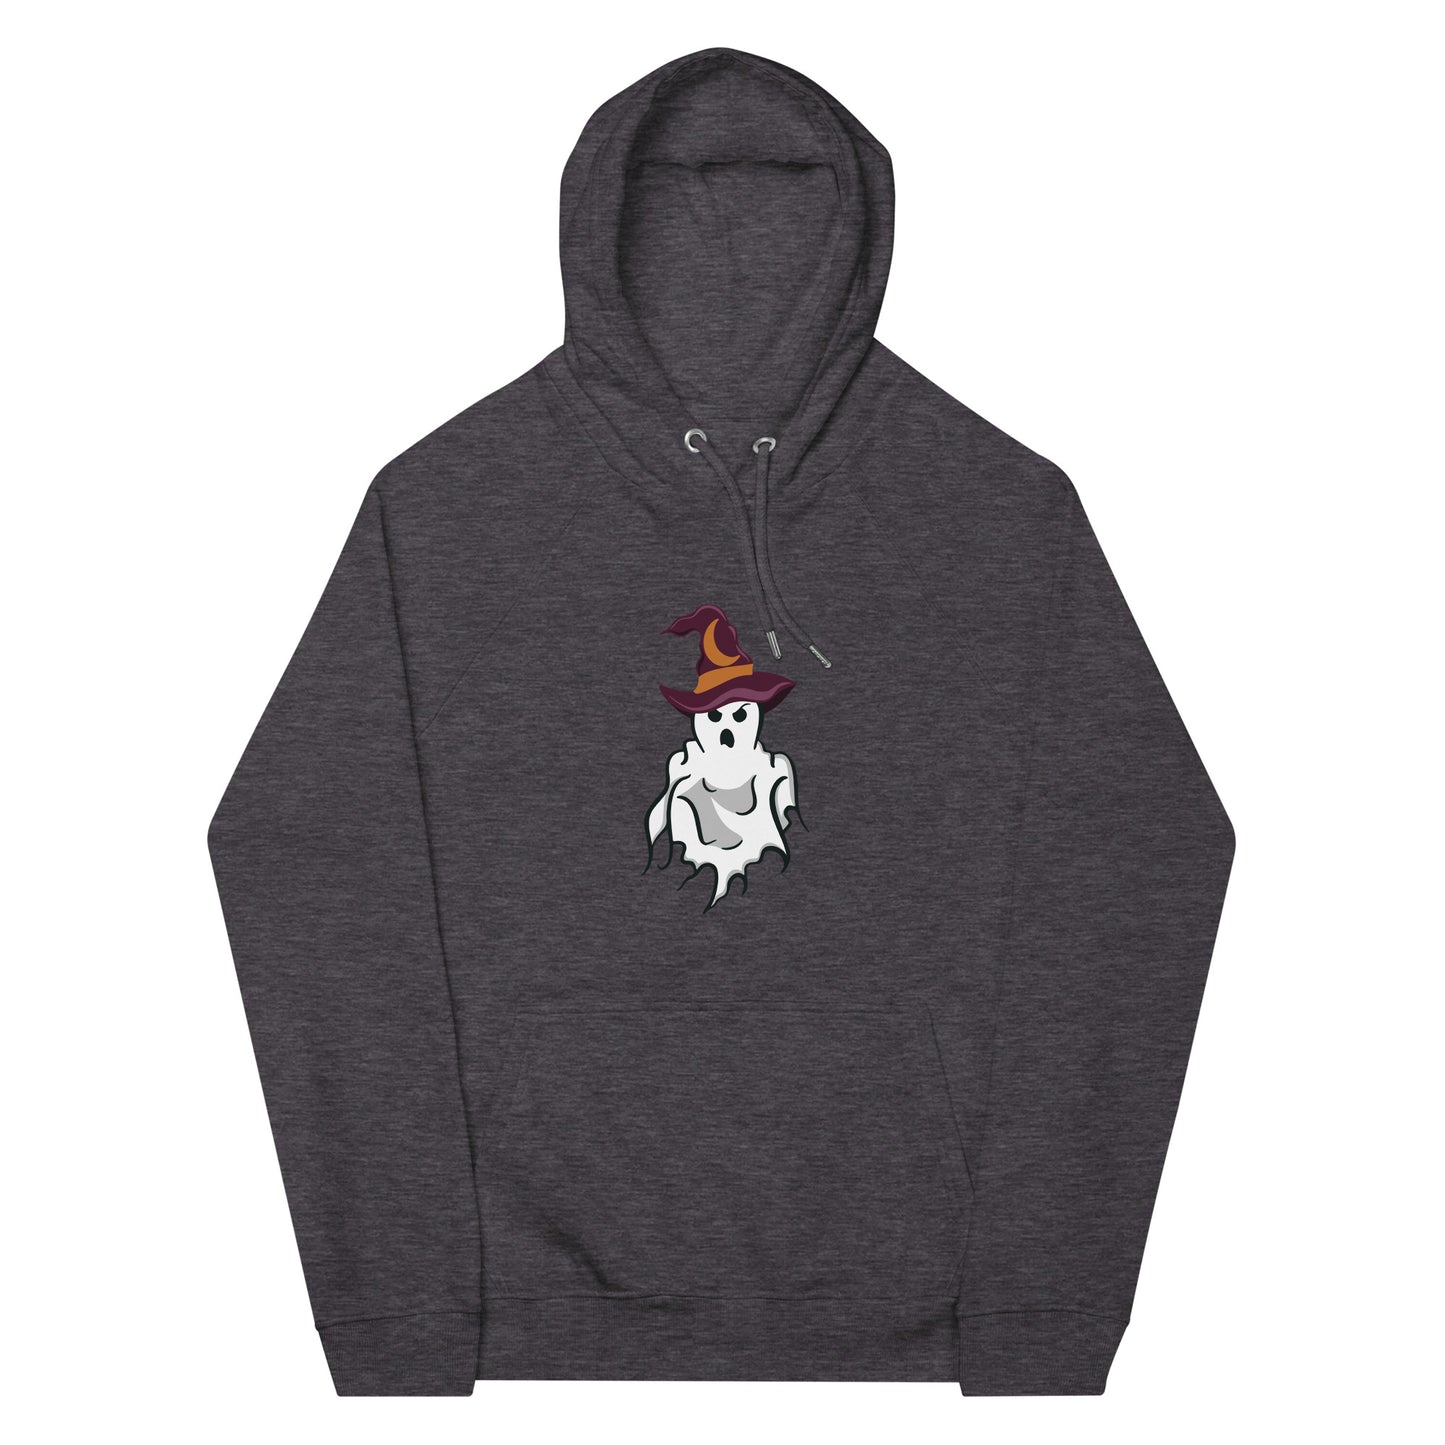 Hoodie with a ghost wearing a witch hat